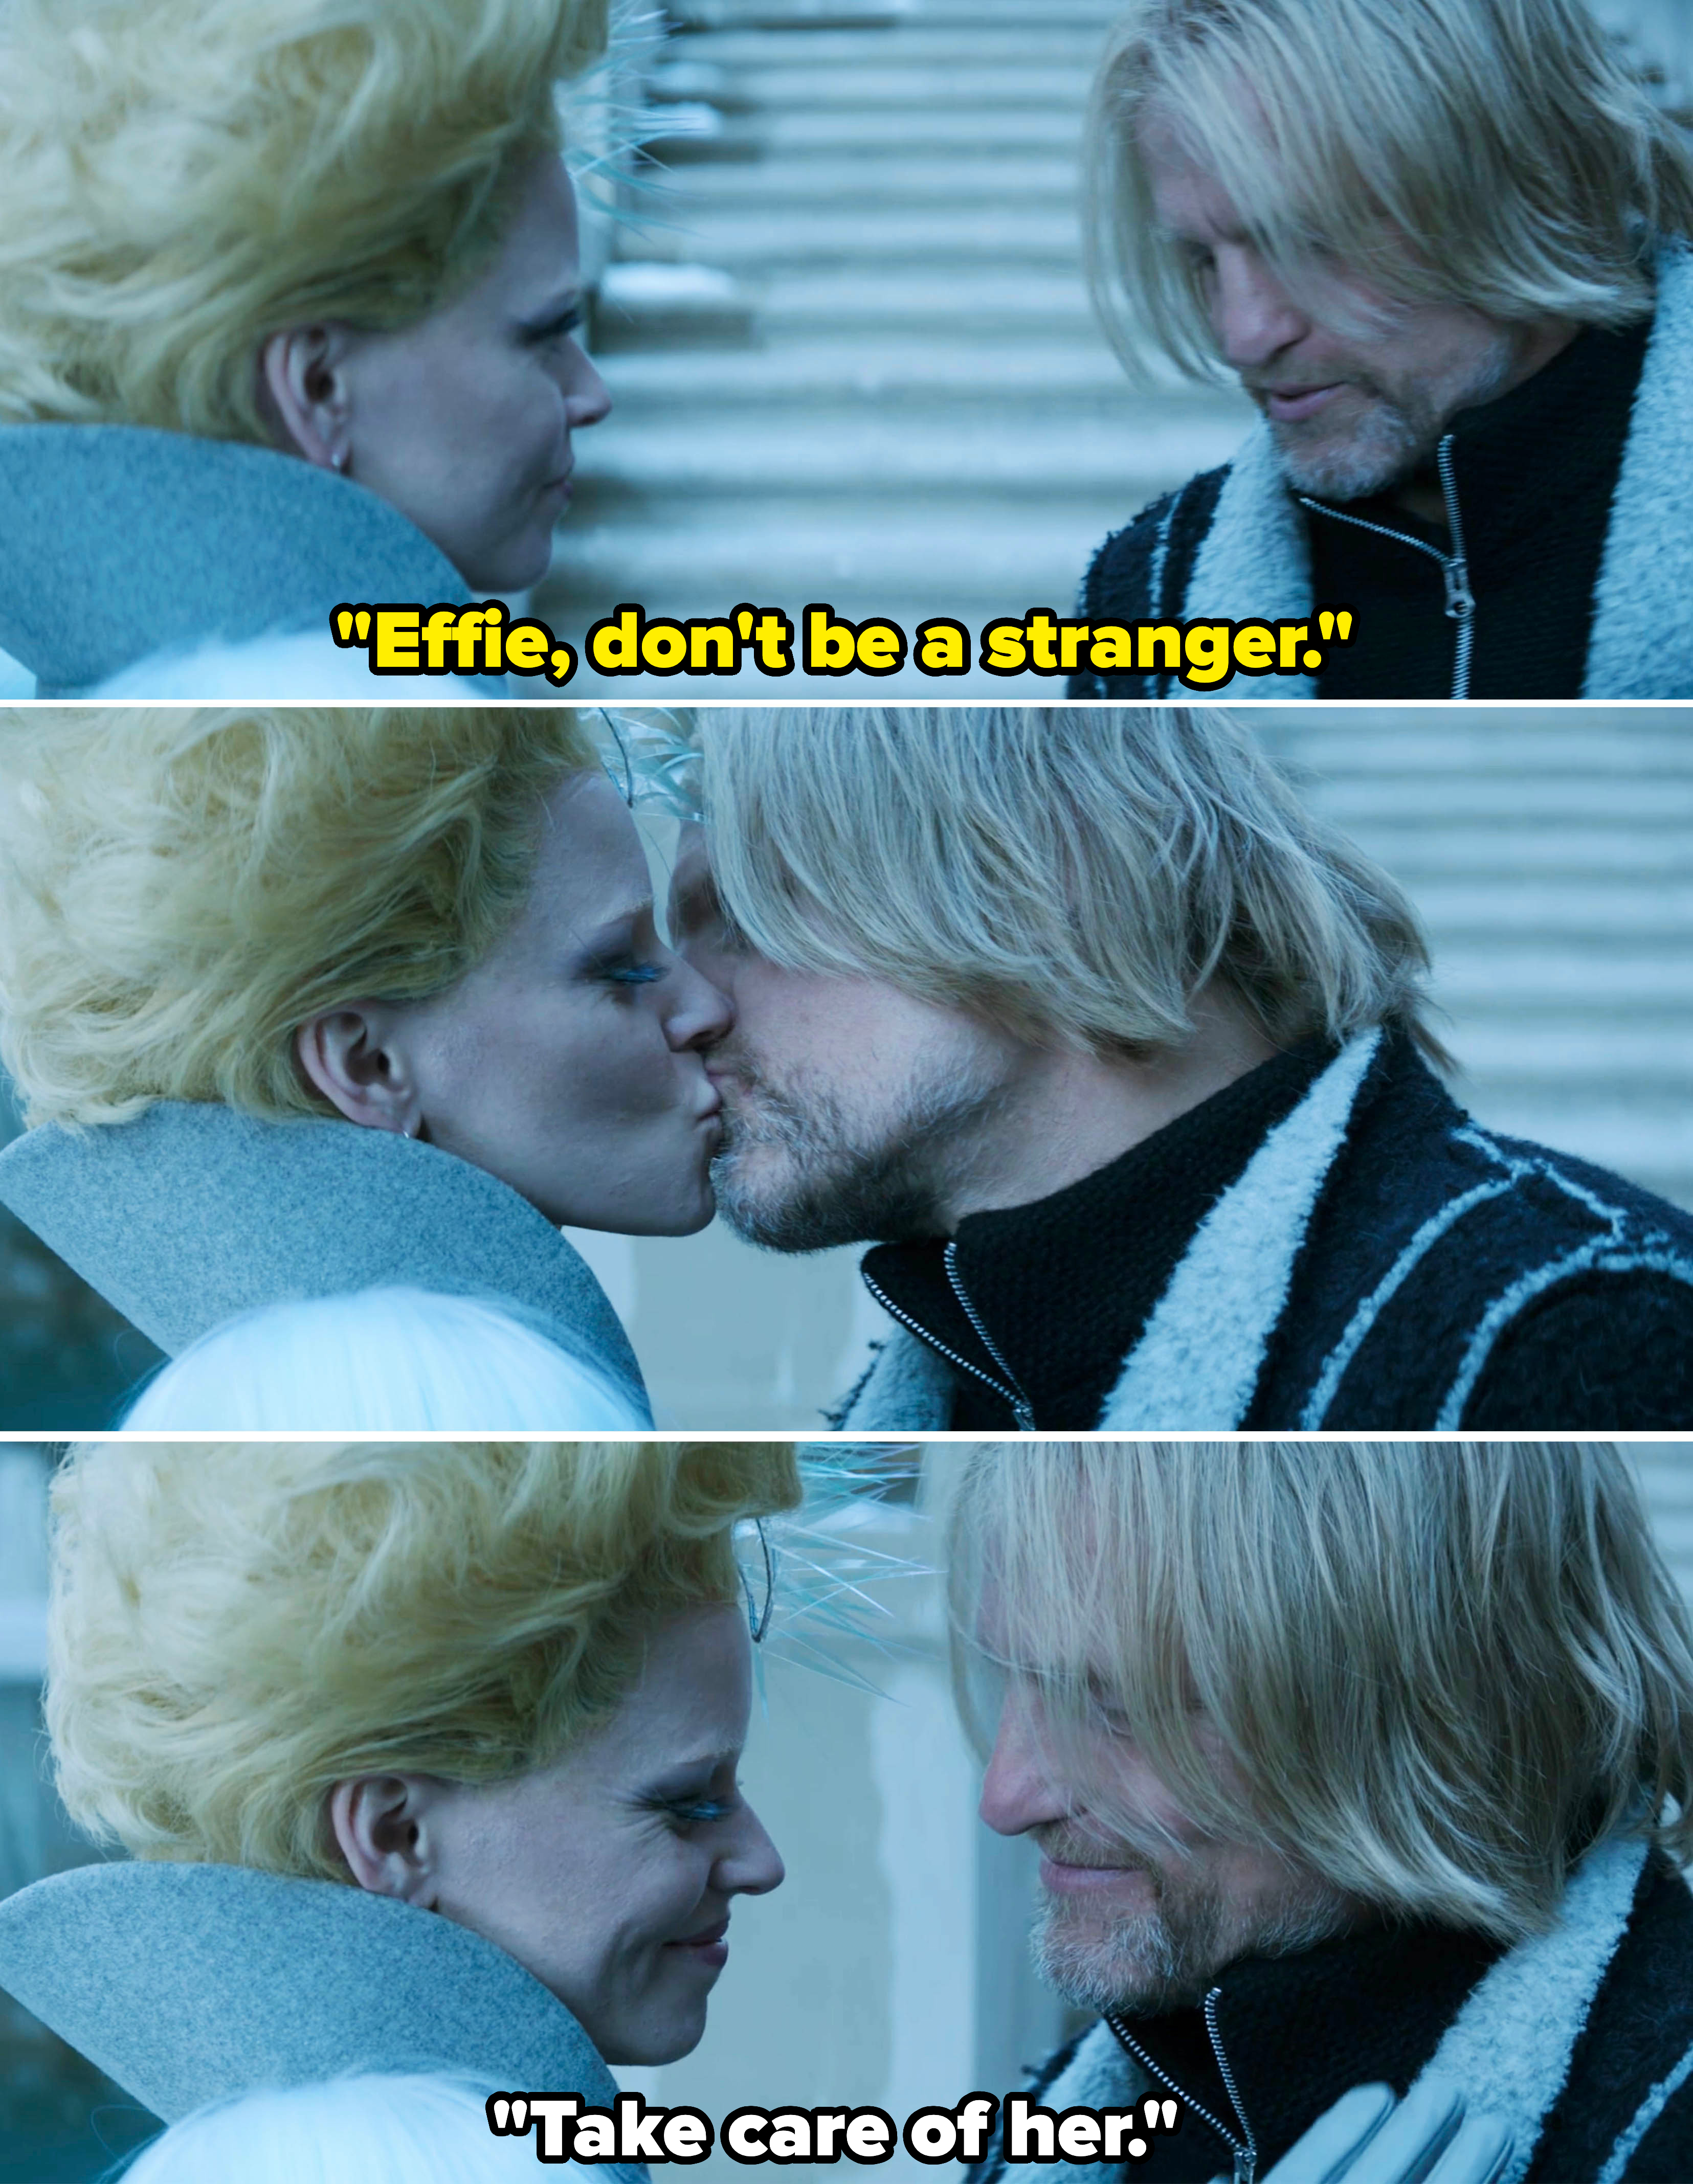 Haymitch telling Effie not to be a stranger, then kissing her, with Effie following up the kiss with, &quot;Take care of her&quot;